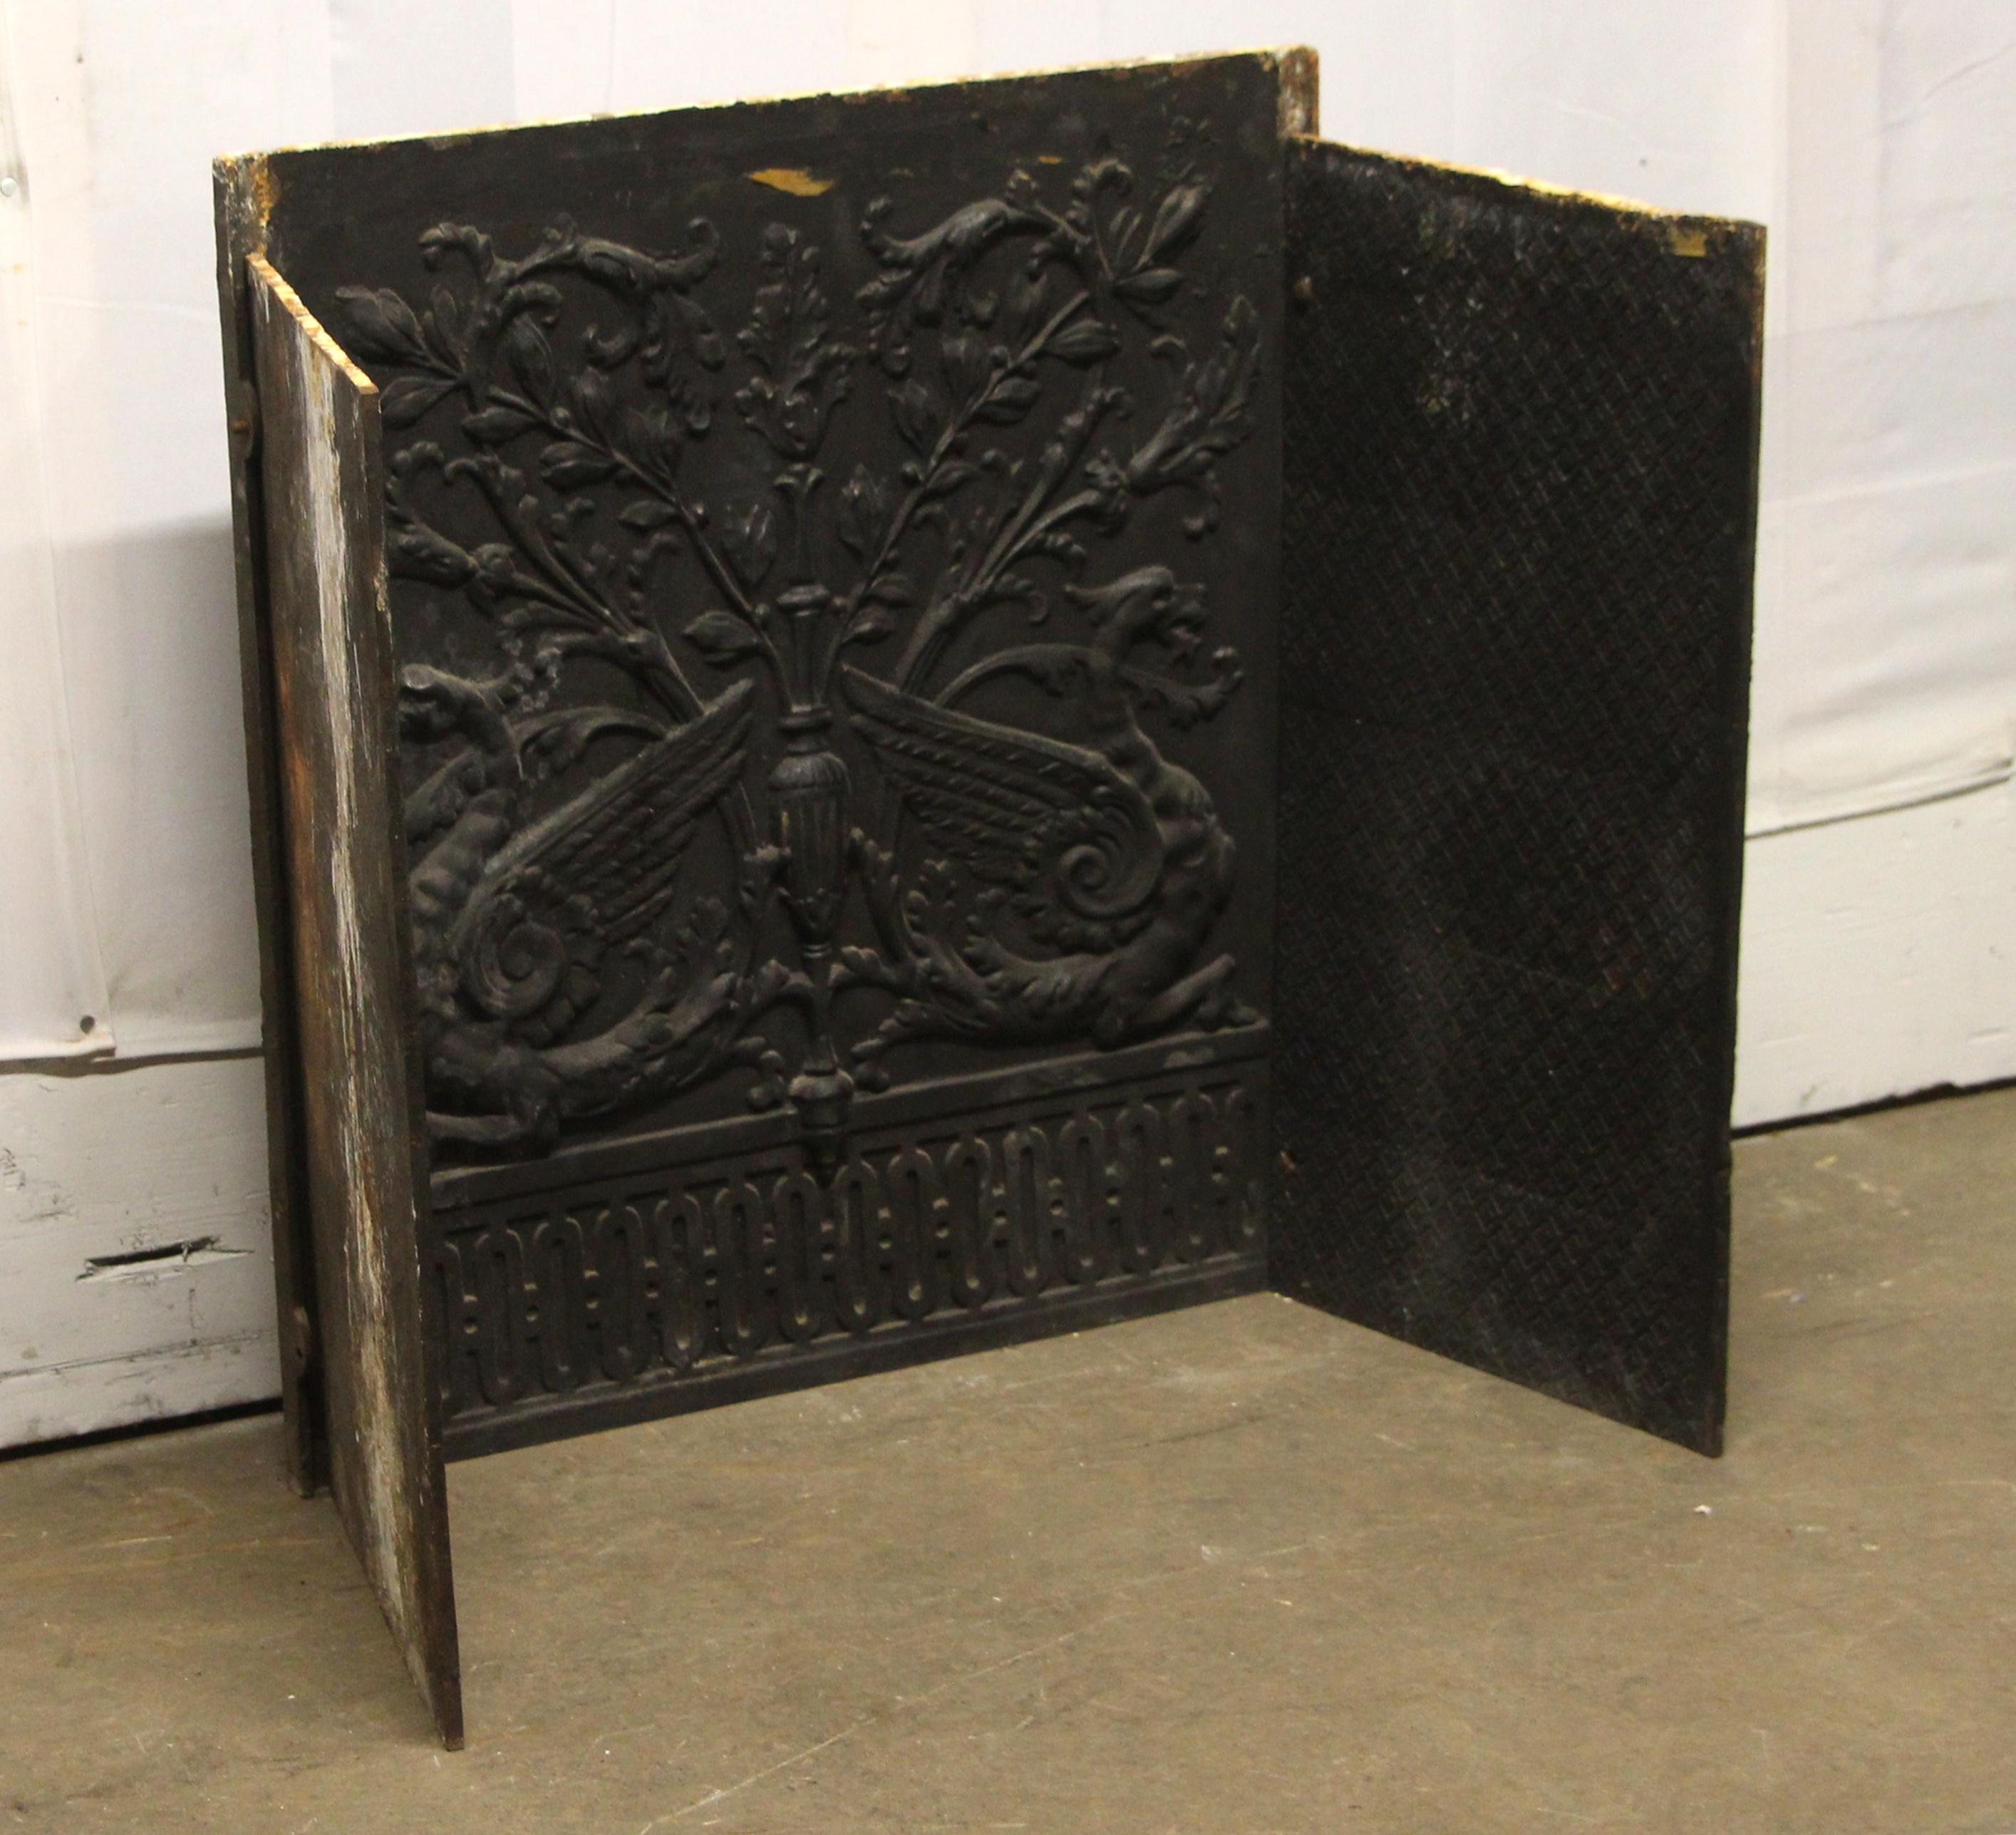 1890s cast iron figural and floral fire back with a black finish. There is general wear from age and use. This can be seen at our 302 Bowery location in NoHo in Manhattan.